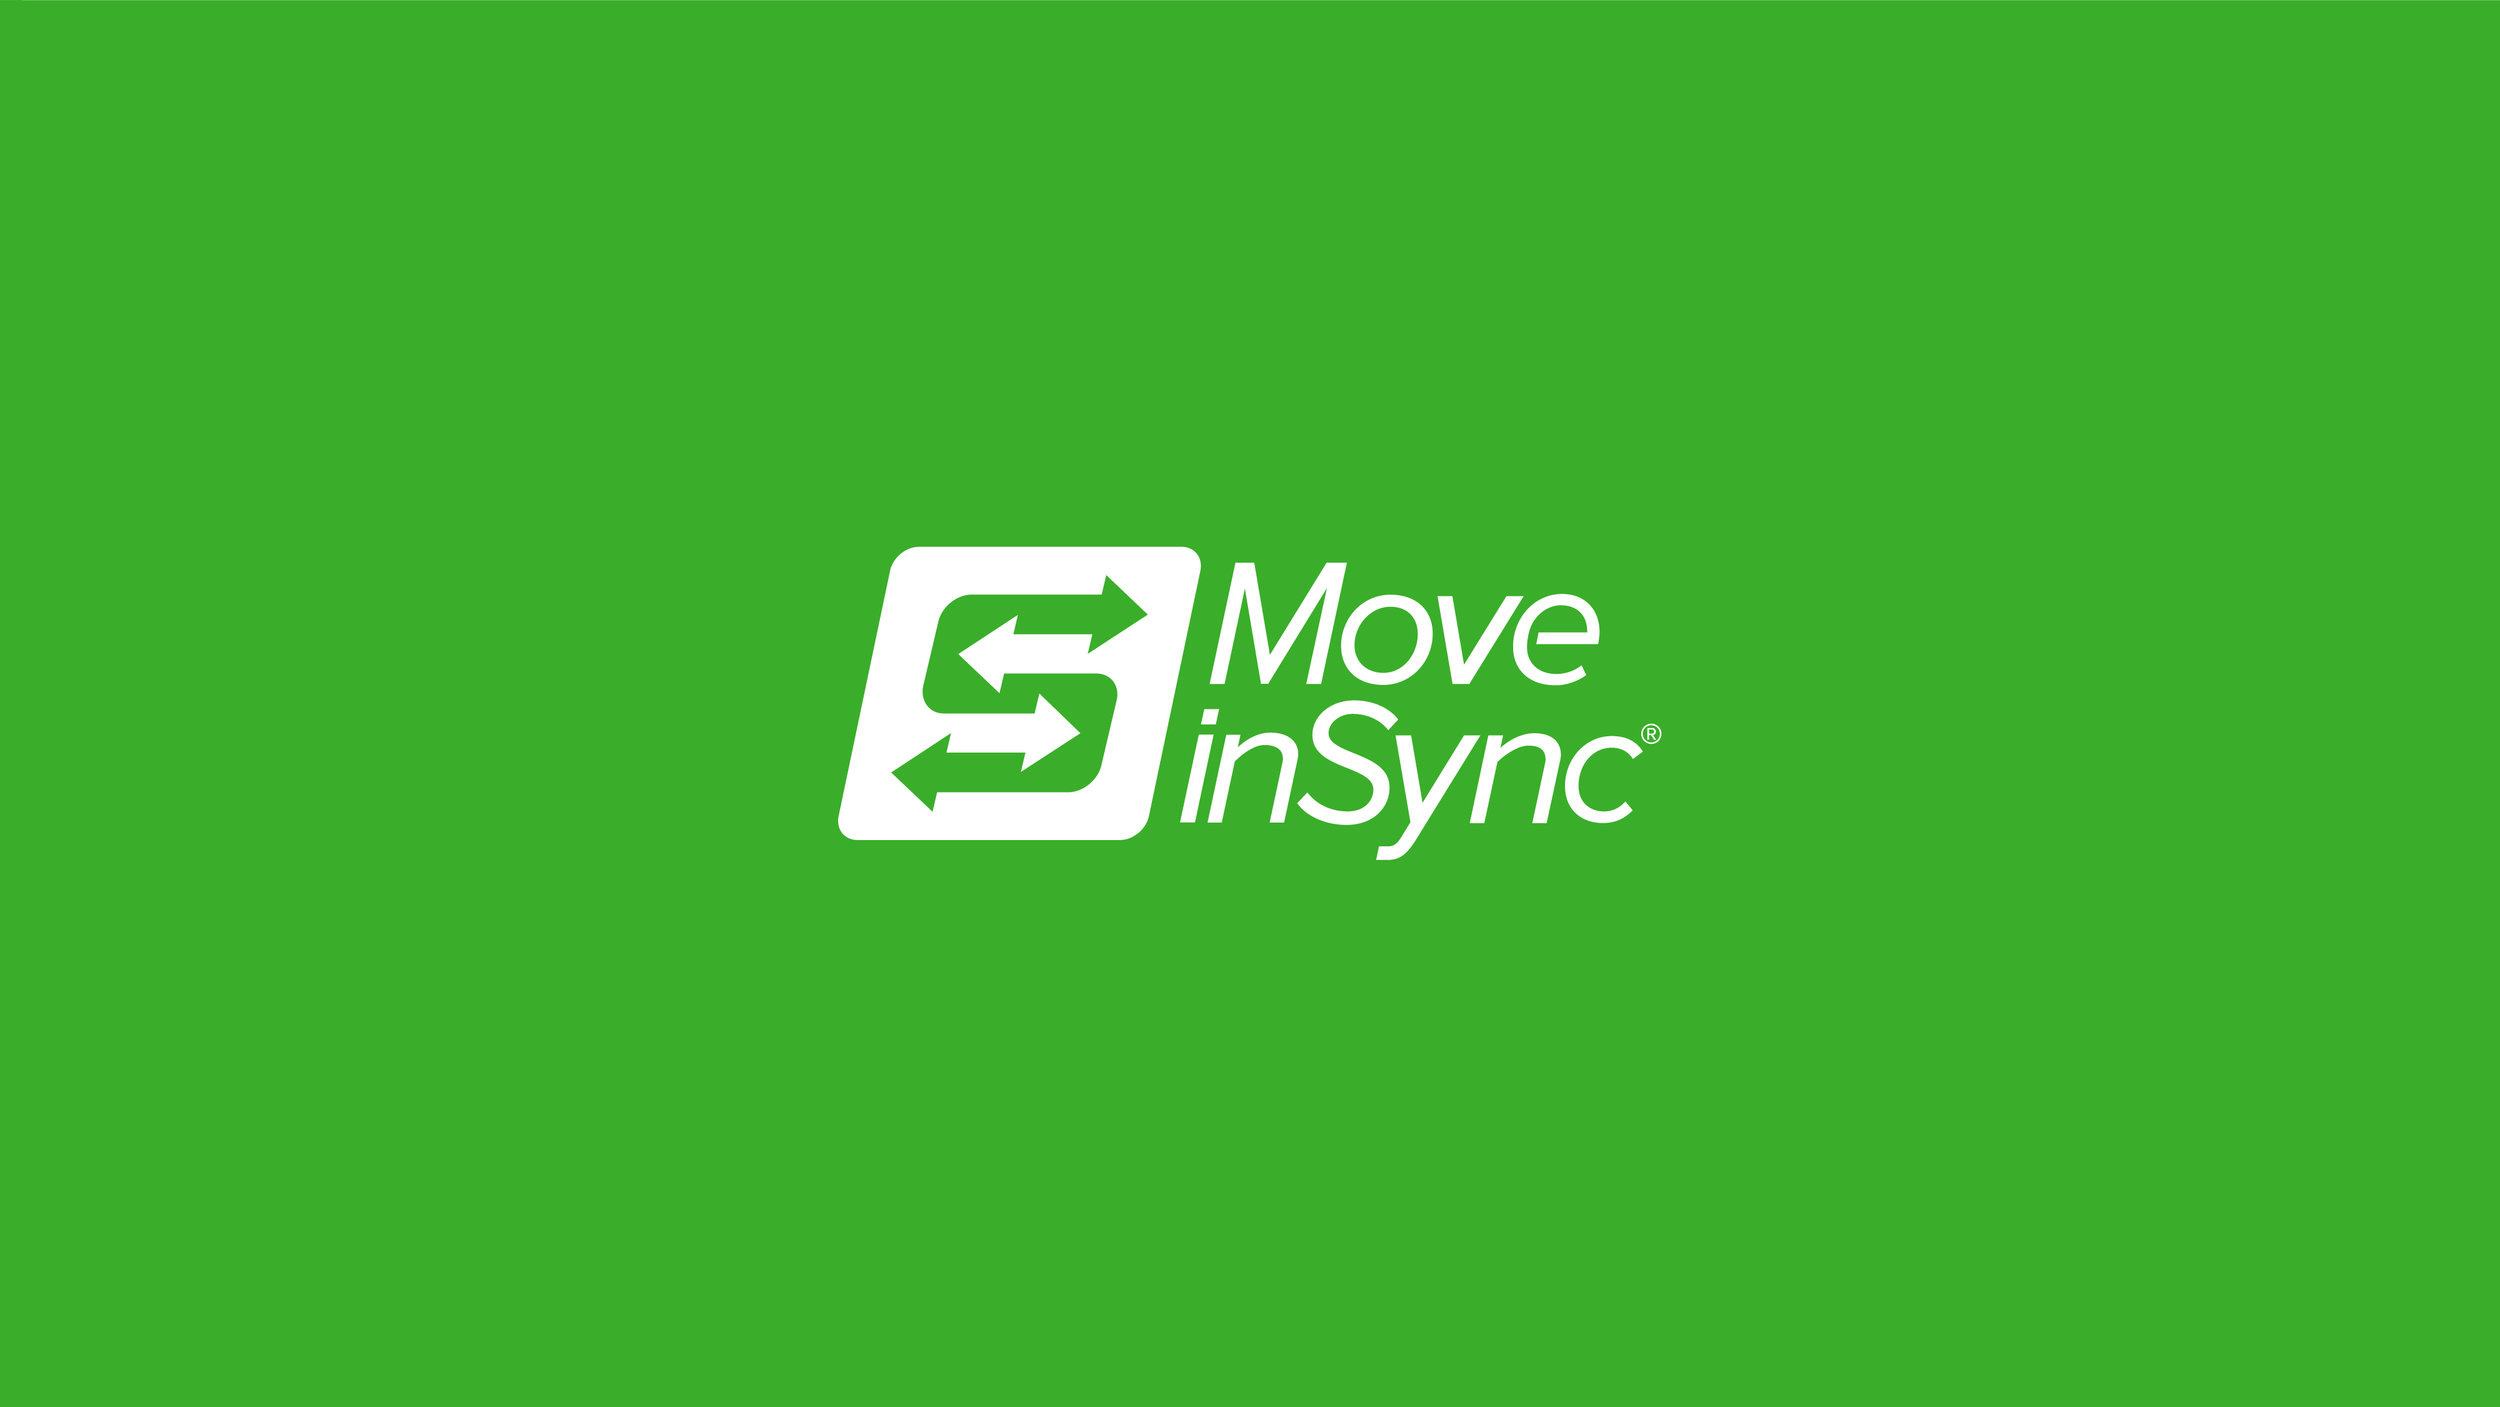 MoveinSync Seeks $50–$60M Funding To Fuel Growth